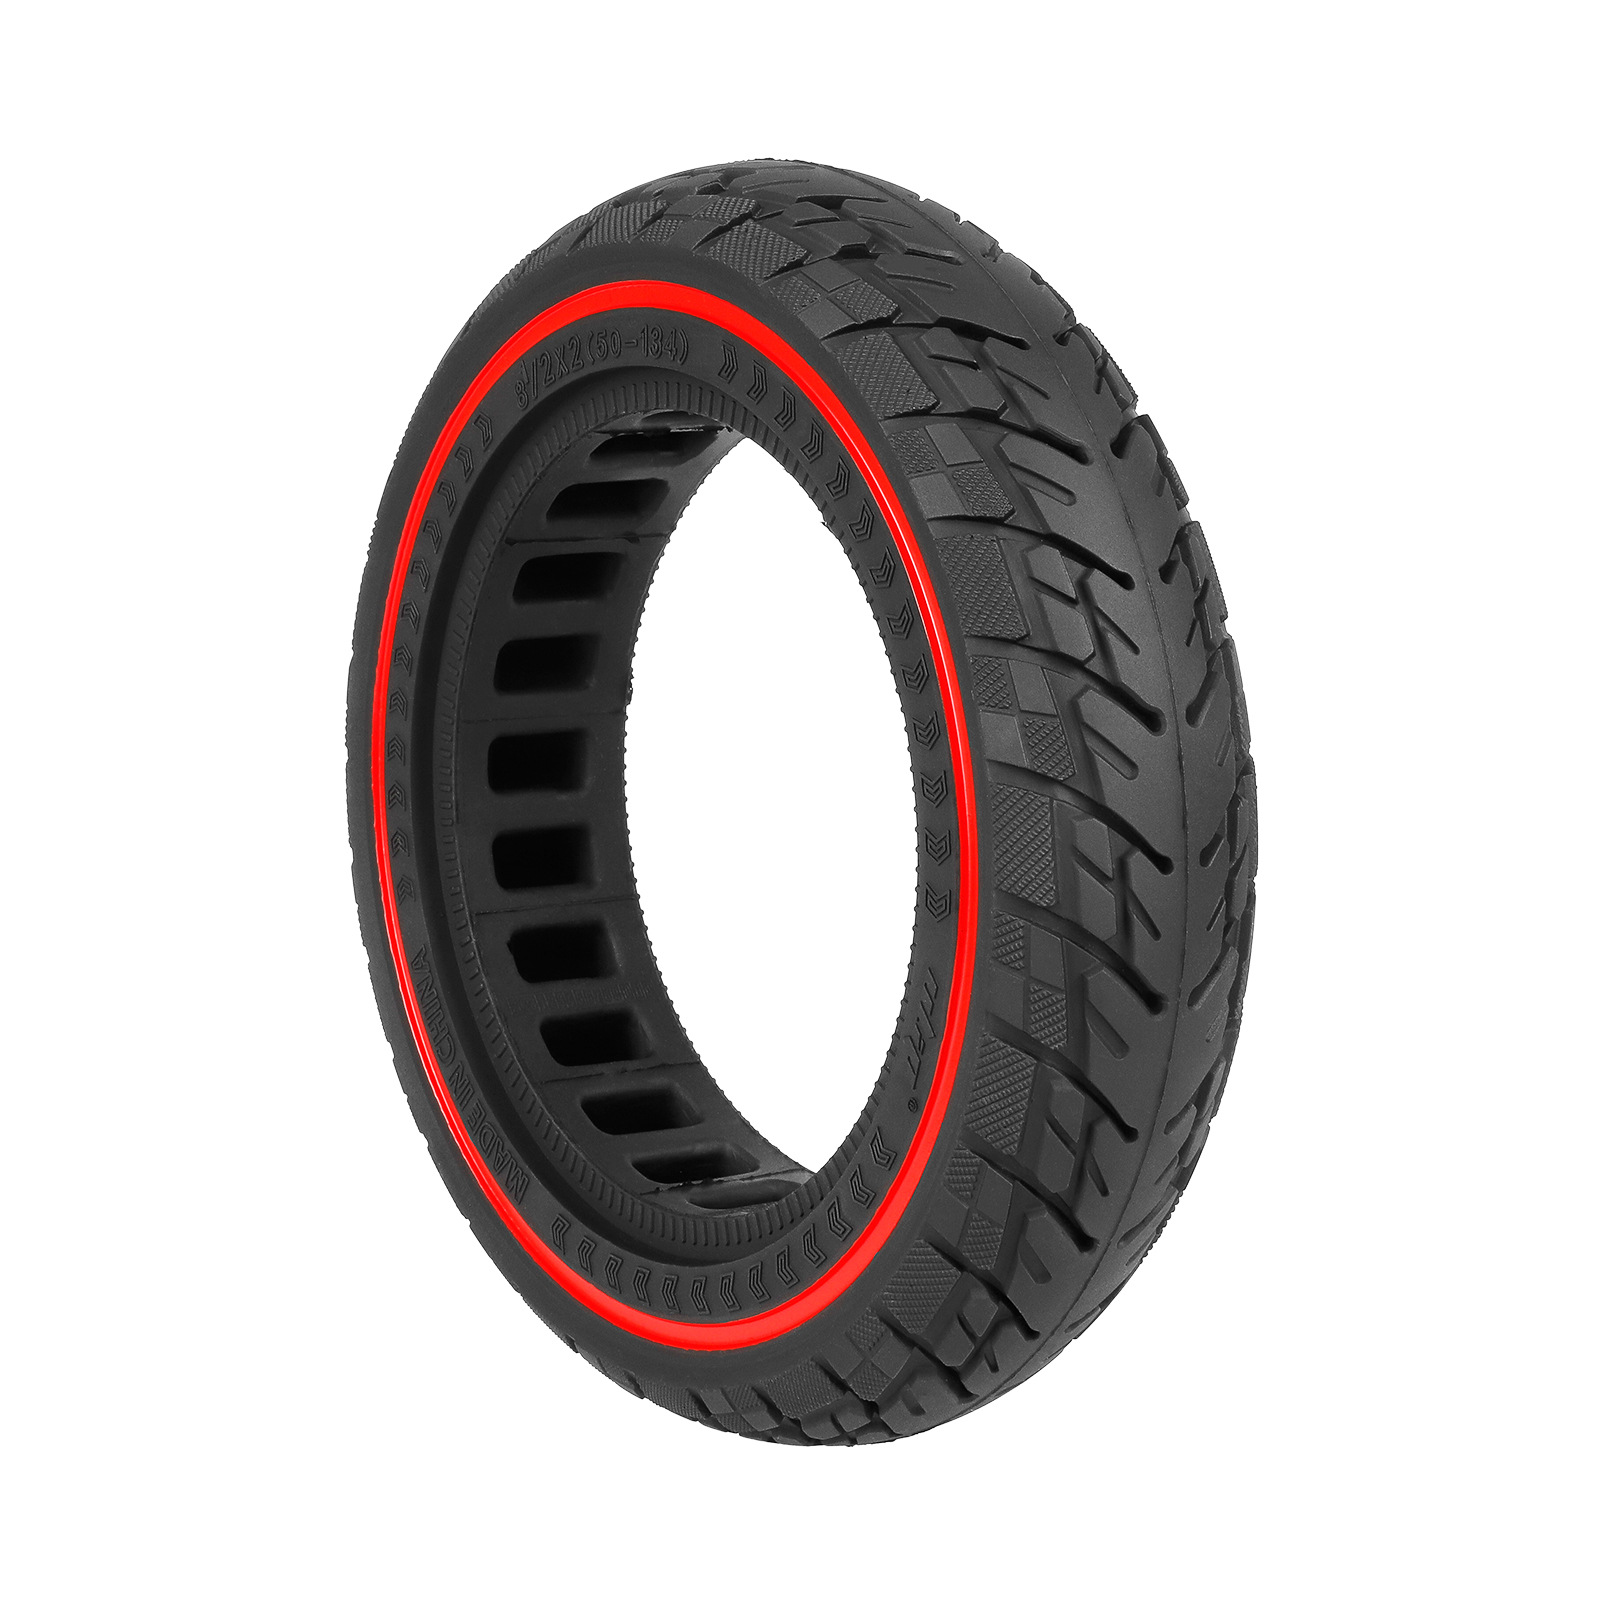 Ulip 8.5*2.0 Inch Solid Tyre For Zero 9/8/ Electric Scooter 8 1/2x2(50-134mm) Rubber Tire Replacement Scooters Accessories